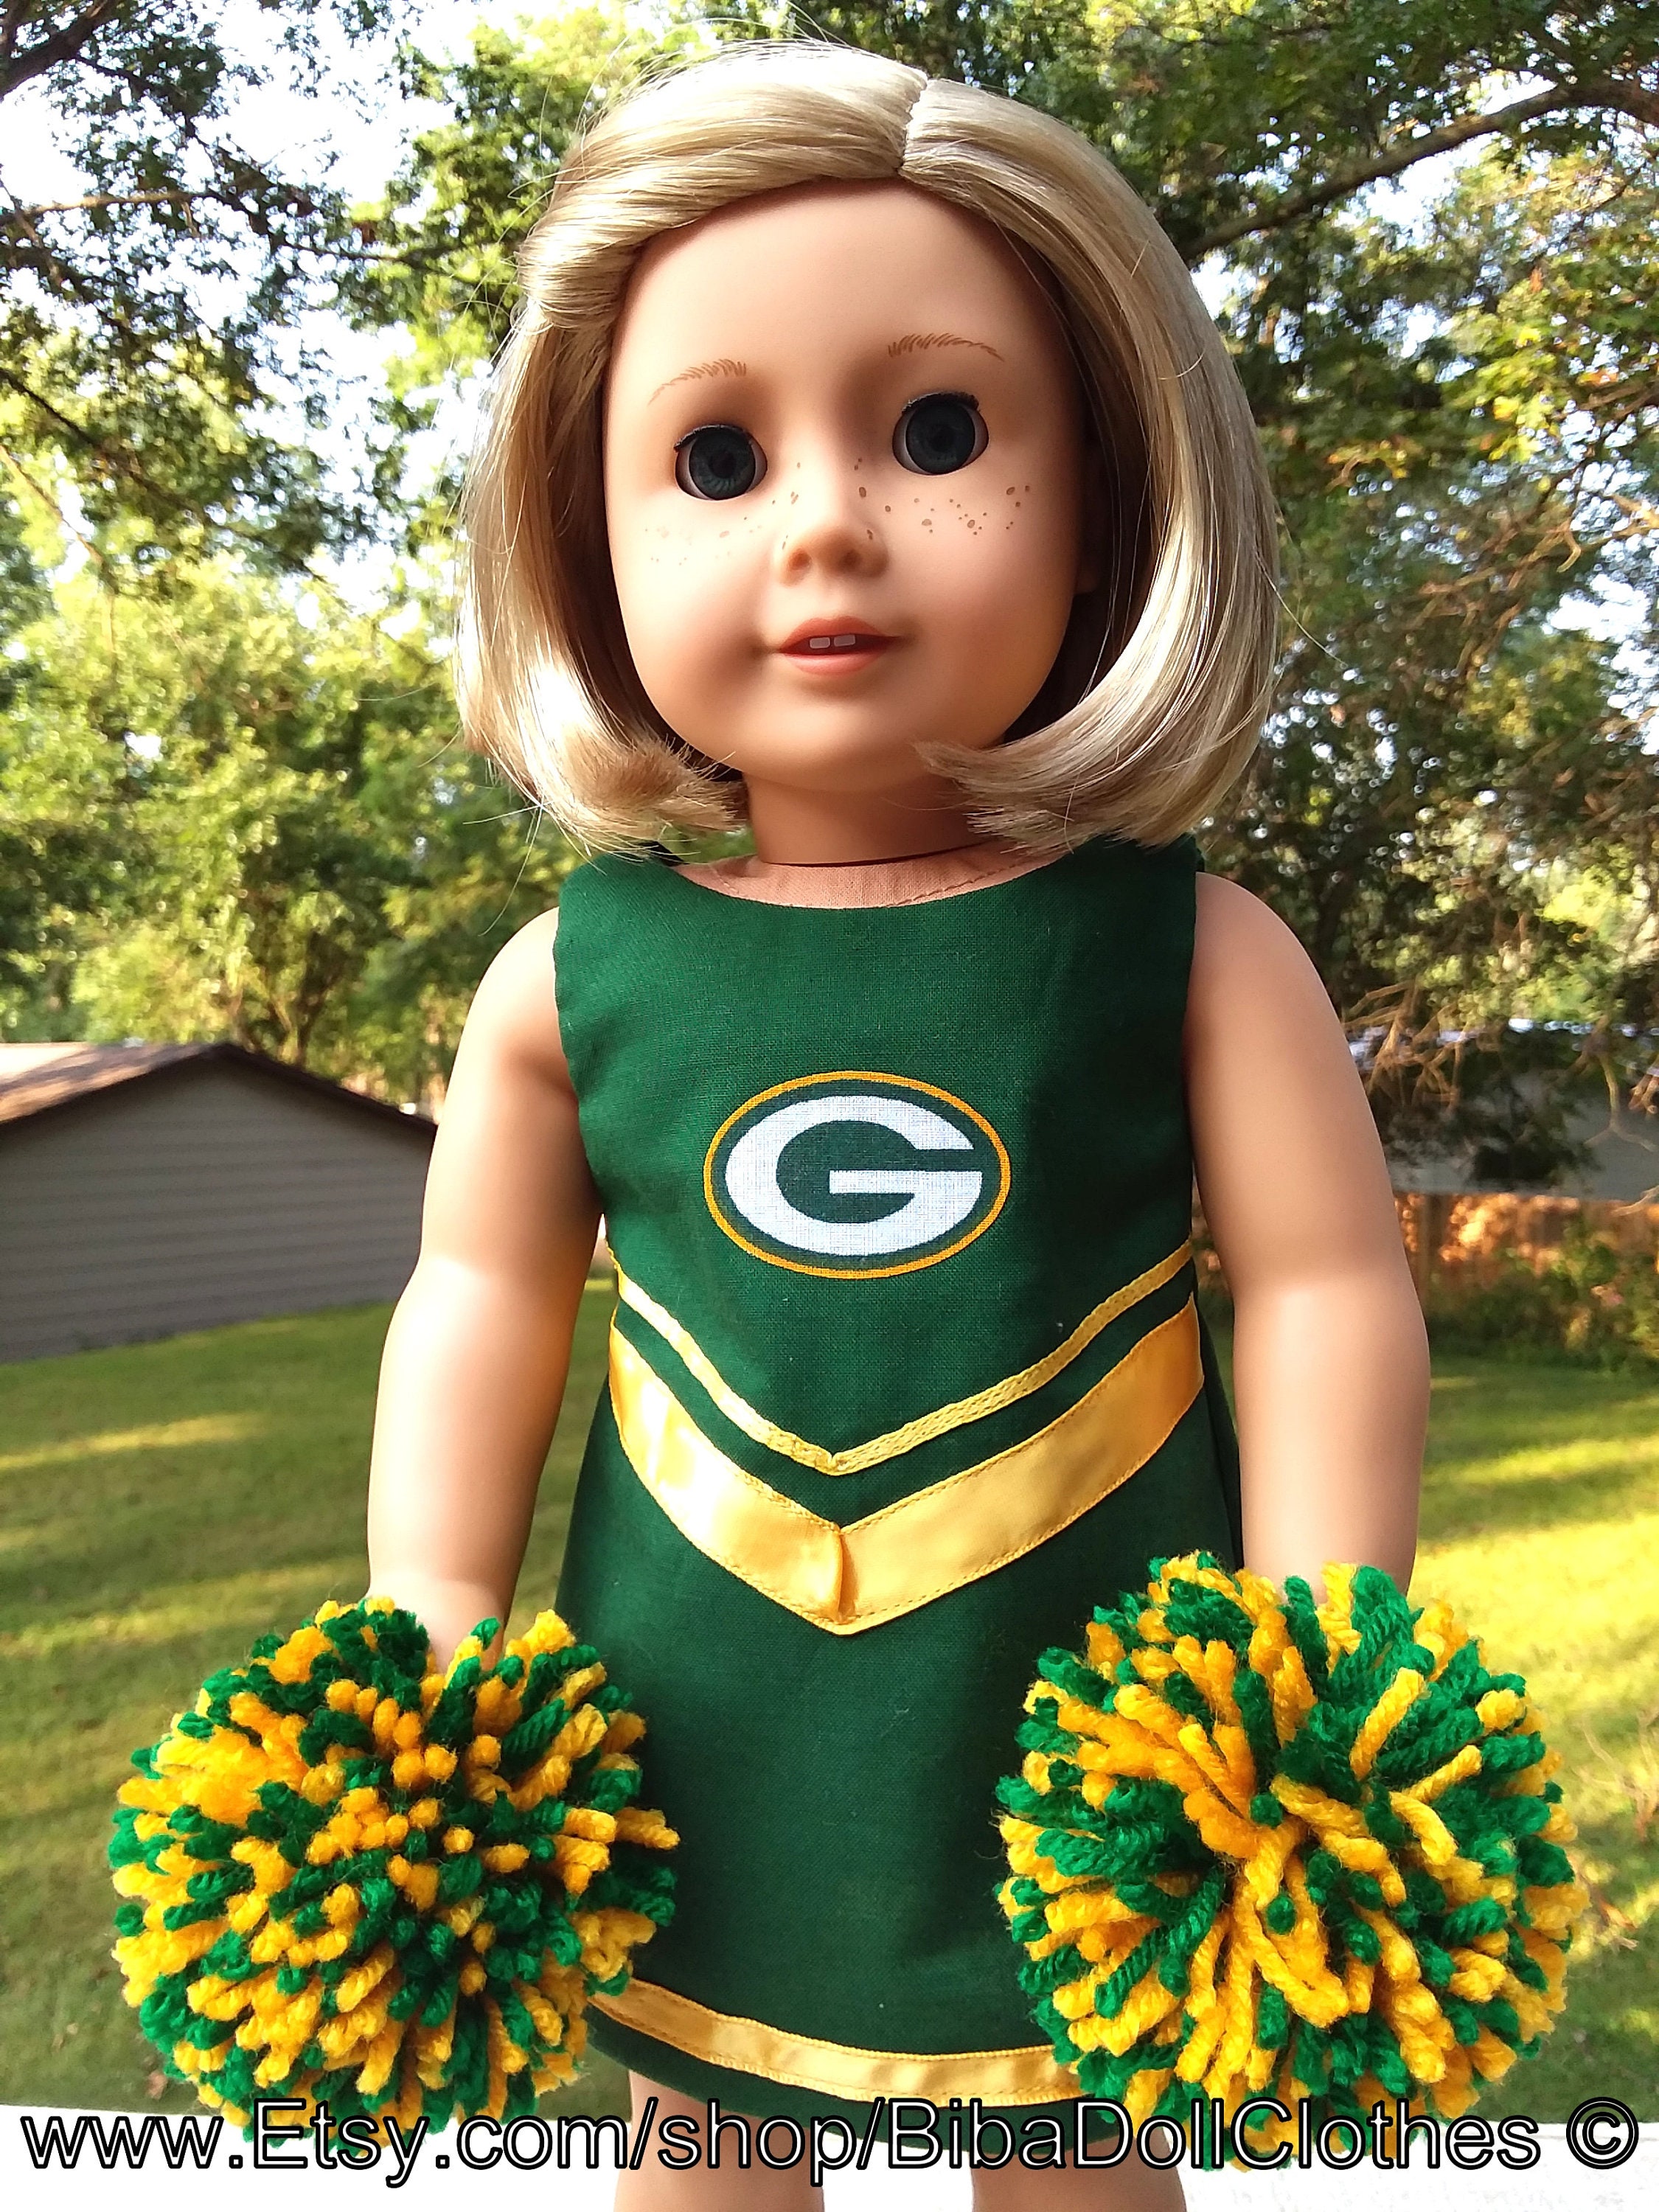 Made for 18 Inch Size Dolls, Green Bay Cheerleader Dress With Shoes. 